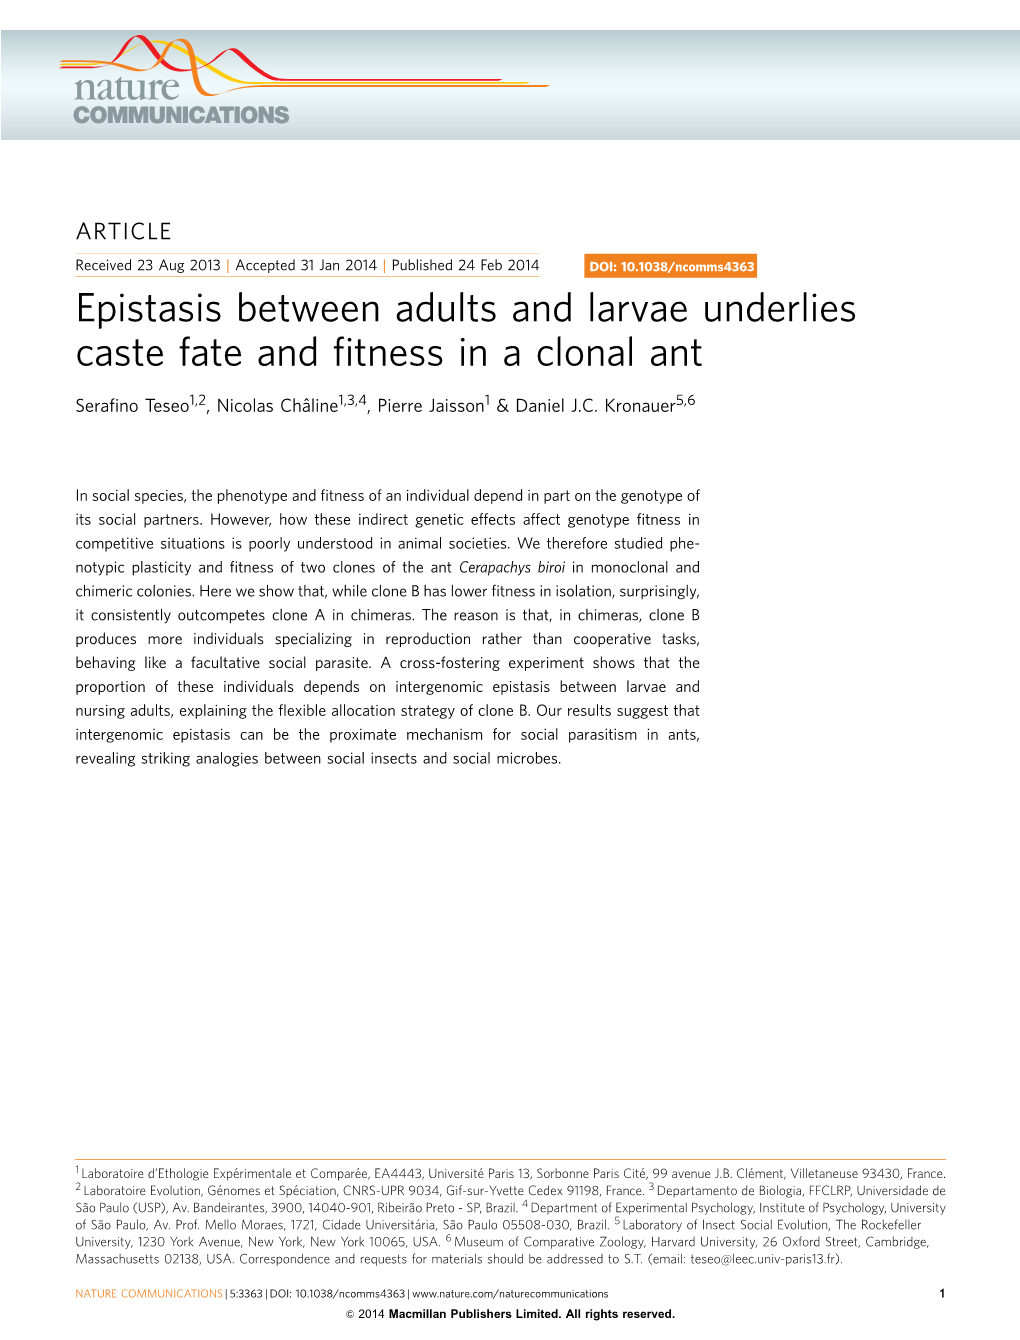 Epistasis Between Adults and Larvae Underlies Caste Fate and Fitness in A